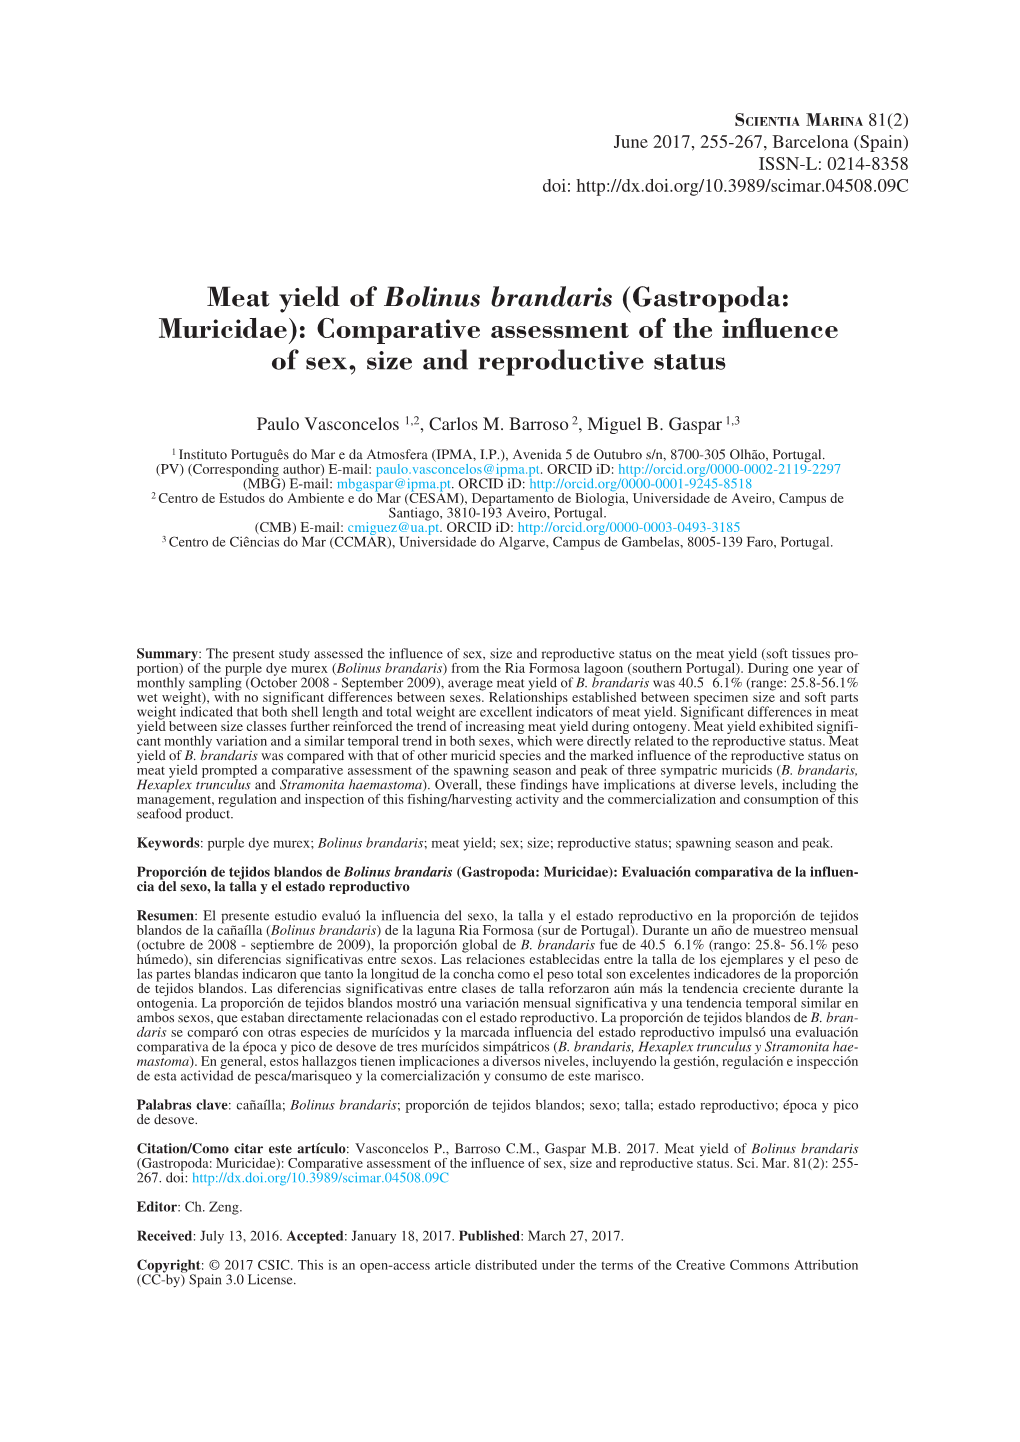 Meat Yield of Bolinus Brandaris (Gastropoda: Muricidae): Comparative Assessment of the Influence of Sex, Size and Reproductive Status